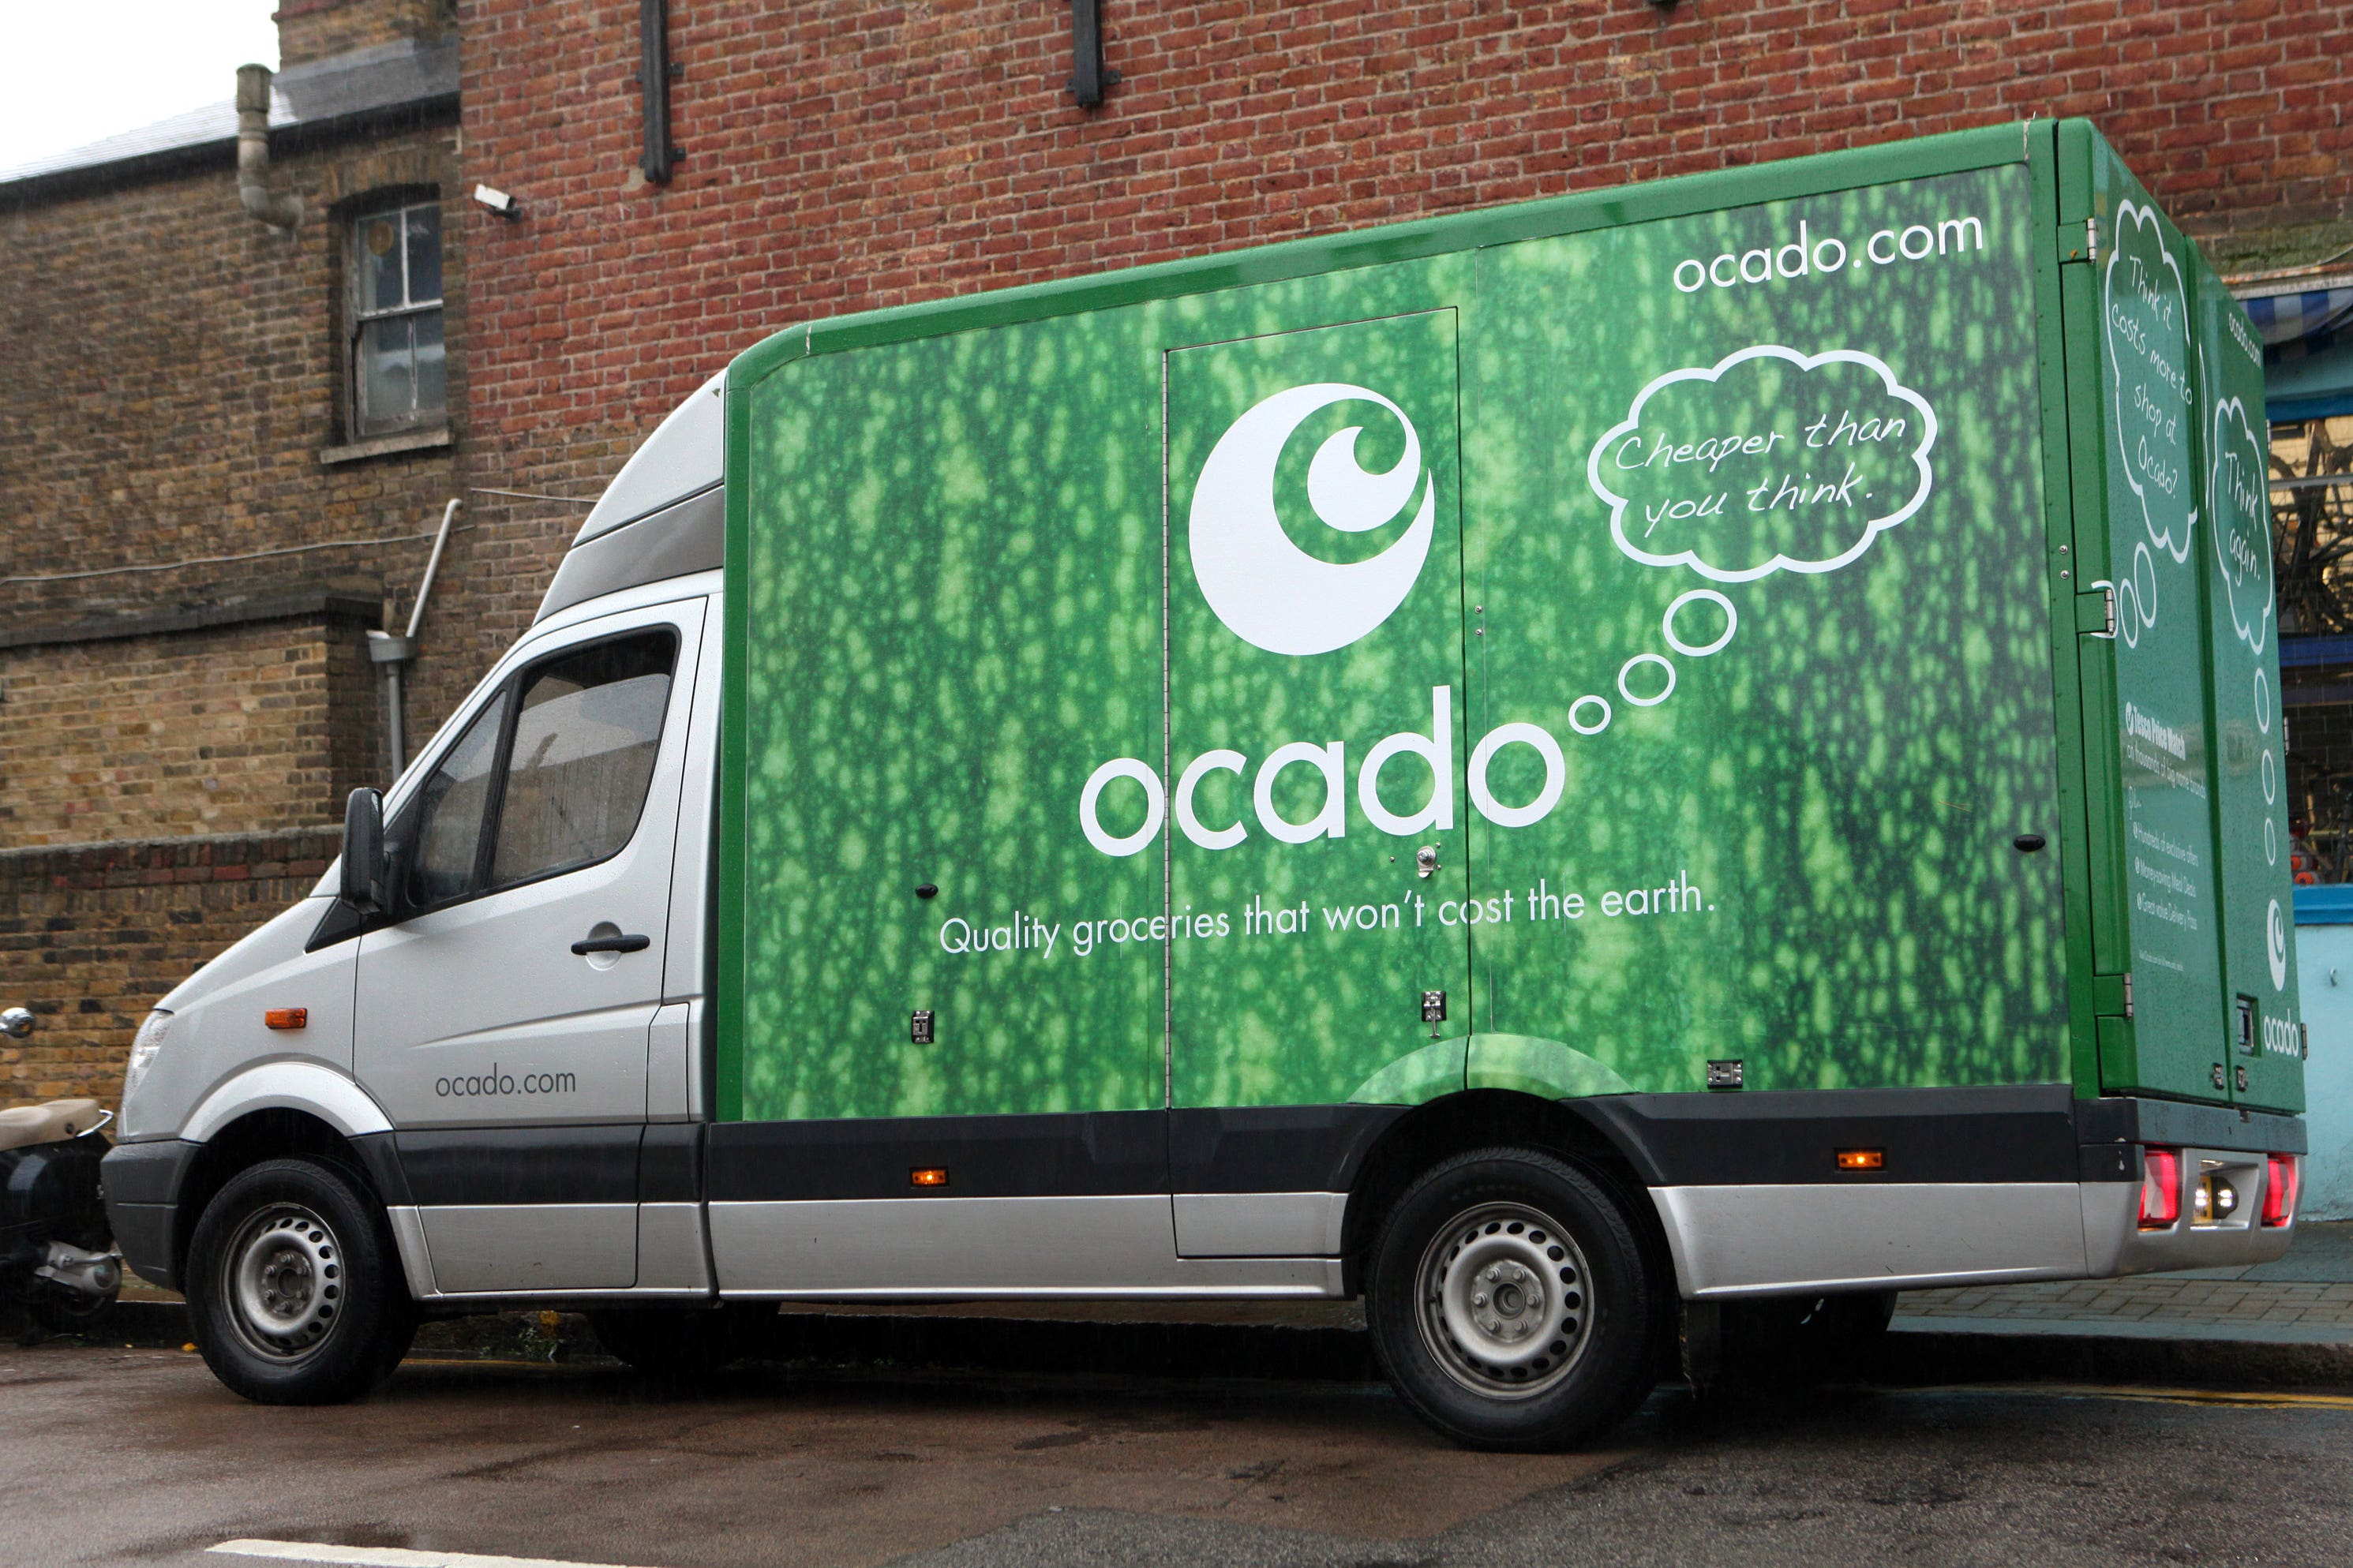 Ocado has announced price cuts on milk and other essentials as grocers compete to pass on falls in wholesale costs to customers (PA)